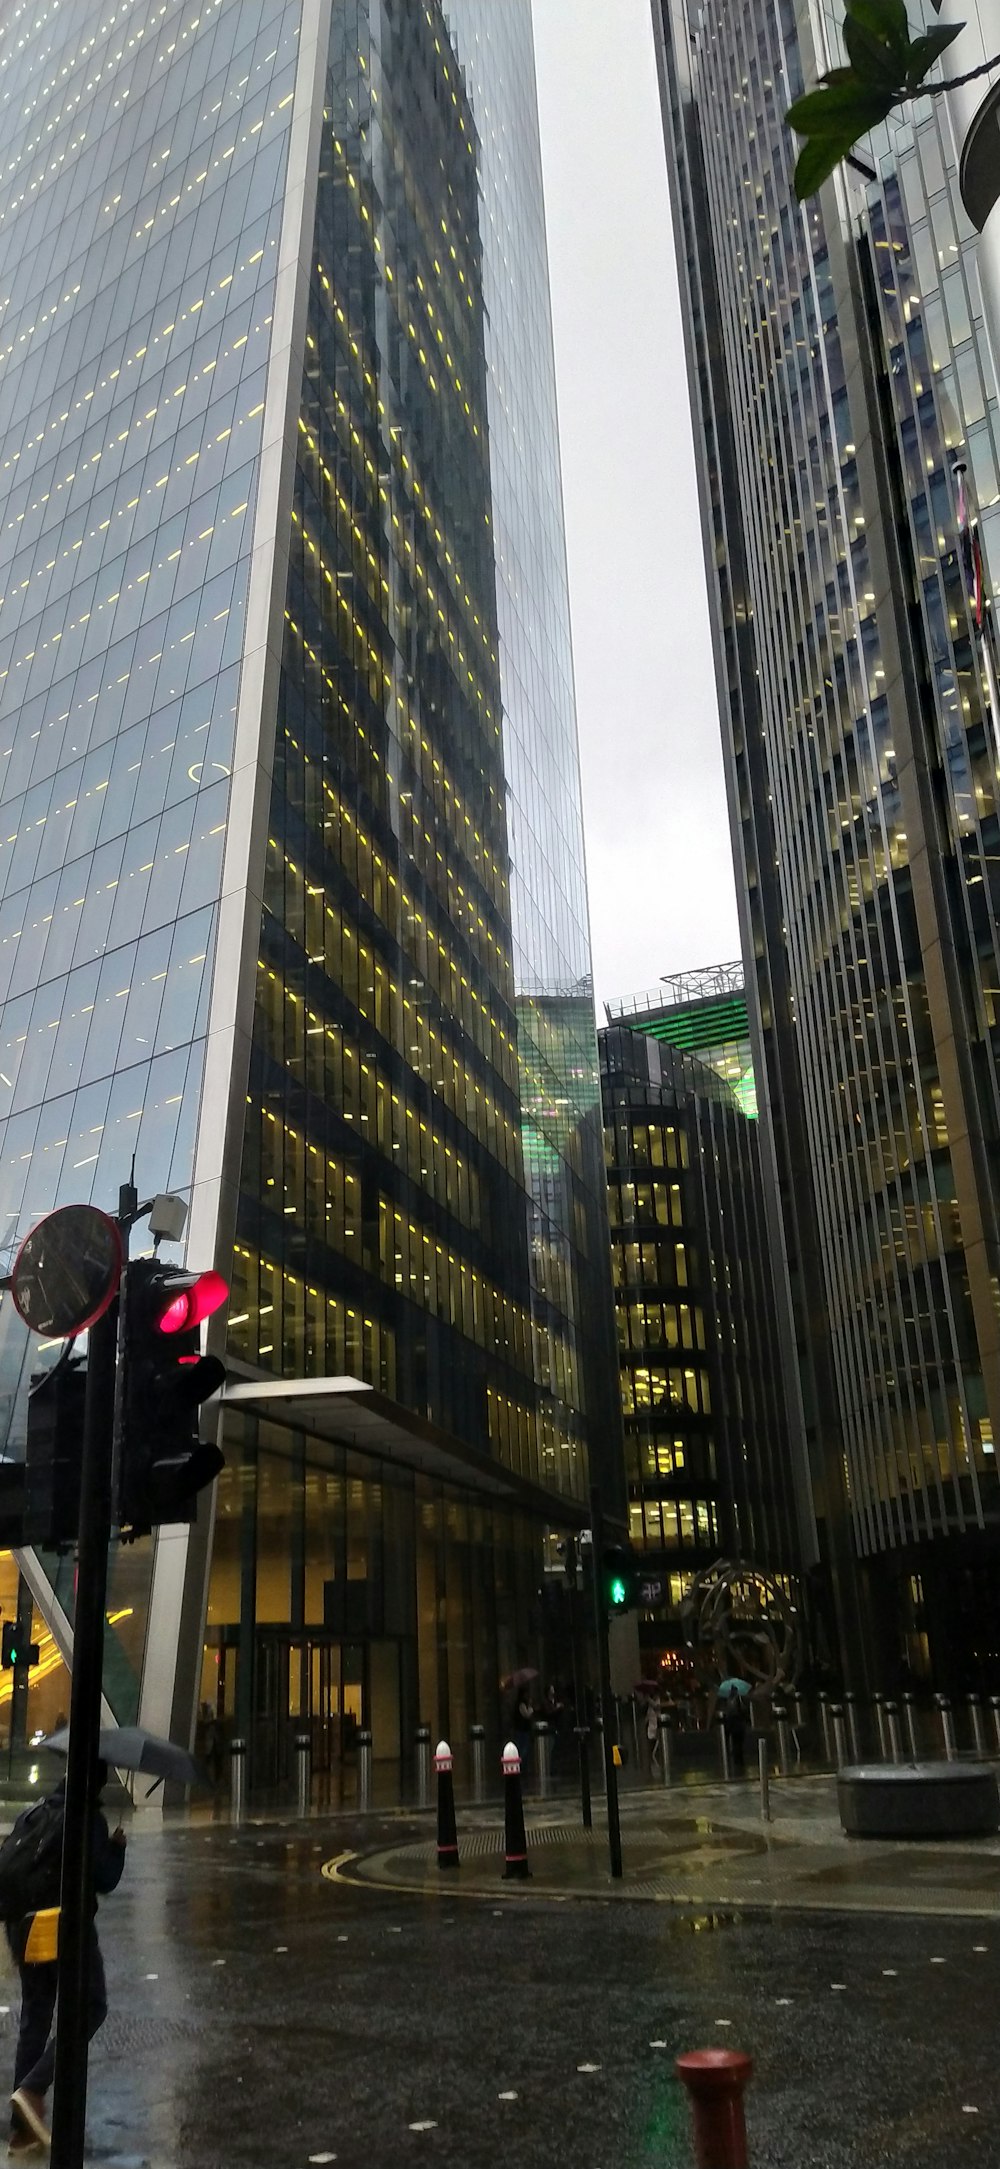 a traffic light sitting in front of a tall building